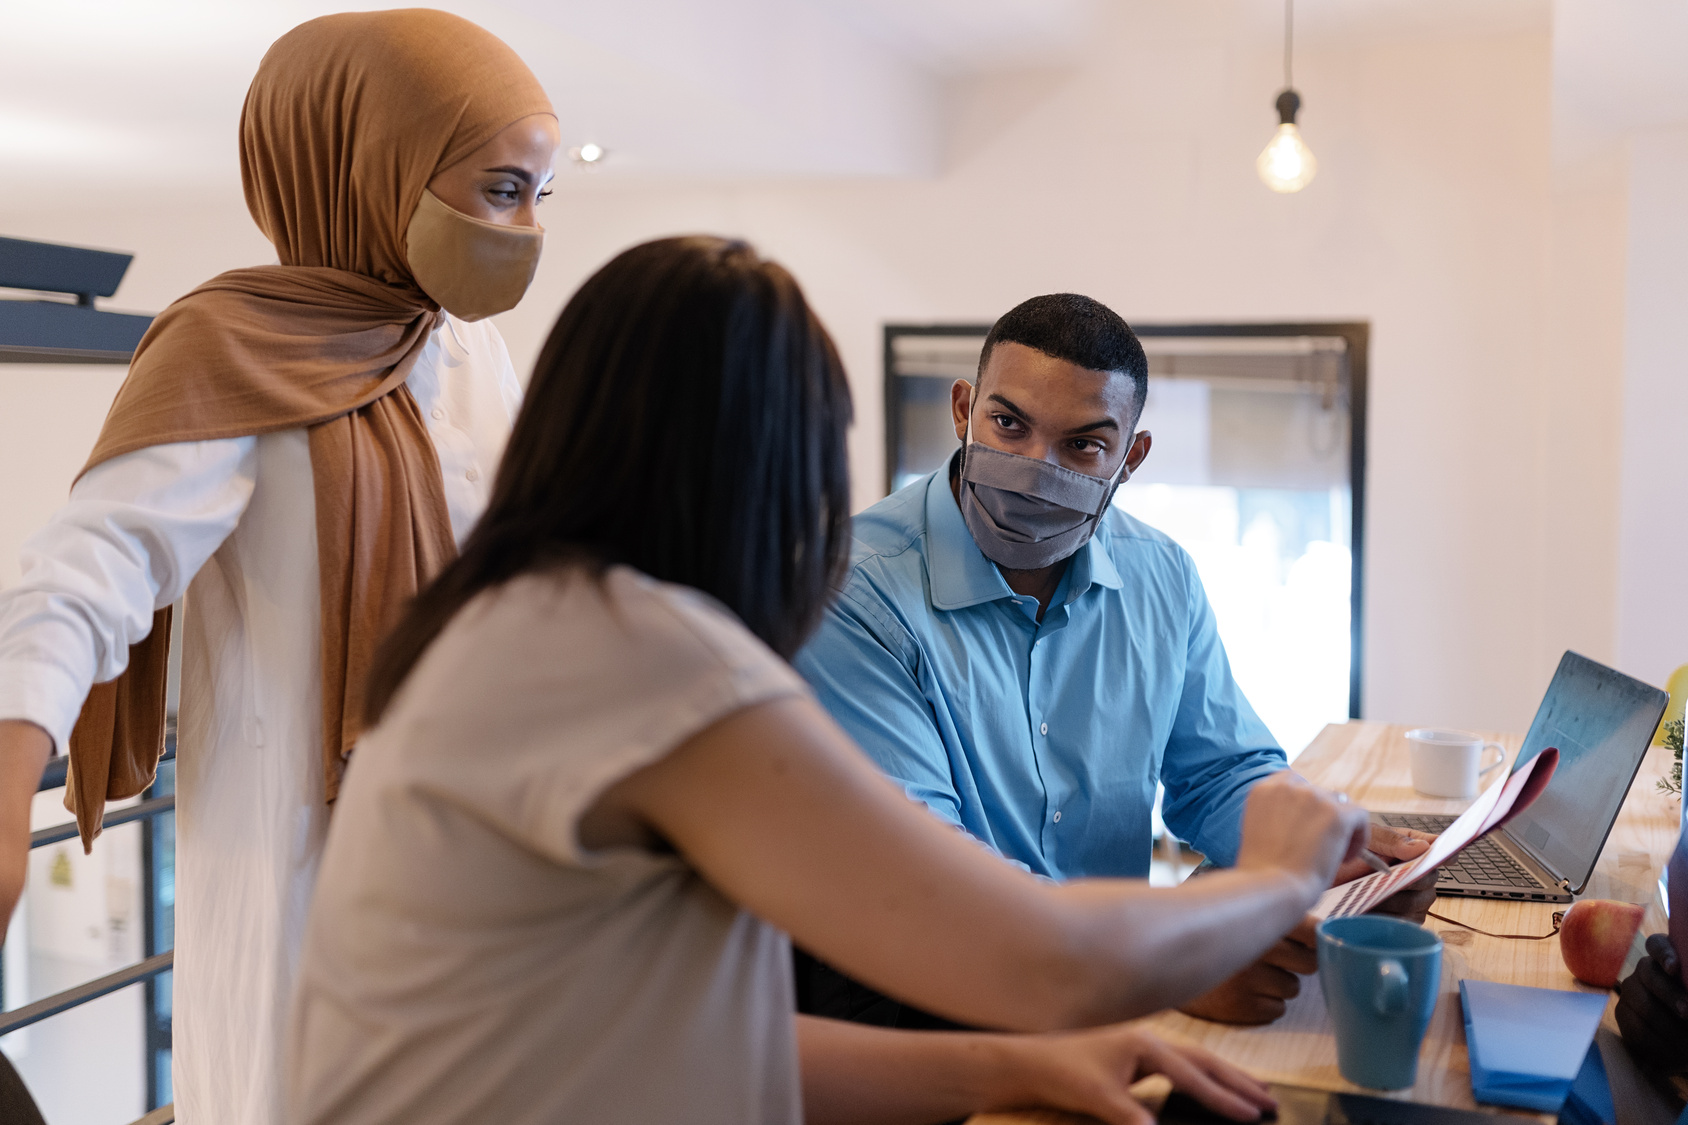 Stock photo of office workers wearing protective face masks due to covid-19 while working in the office. They are sharing ideas and using a laptop.